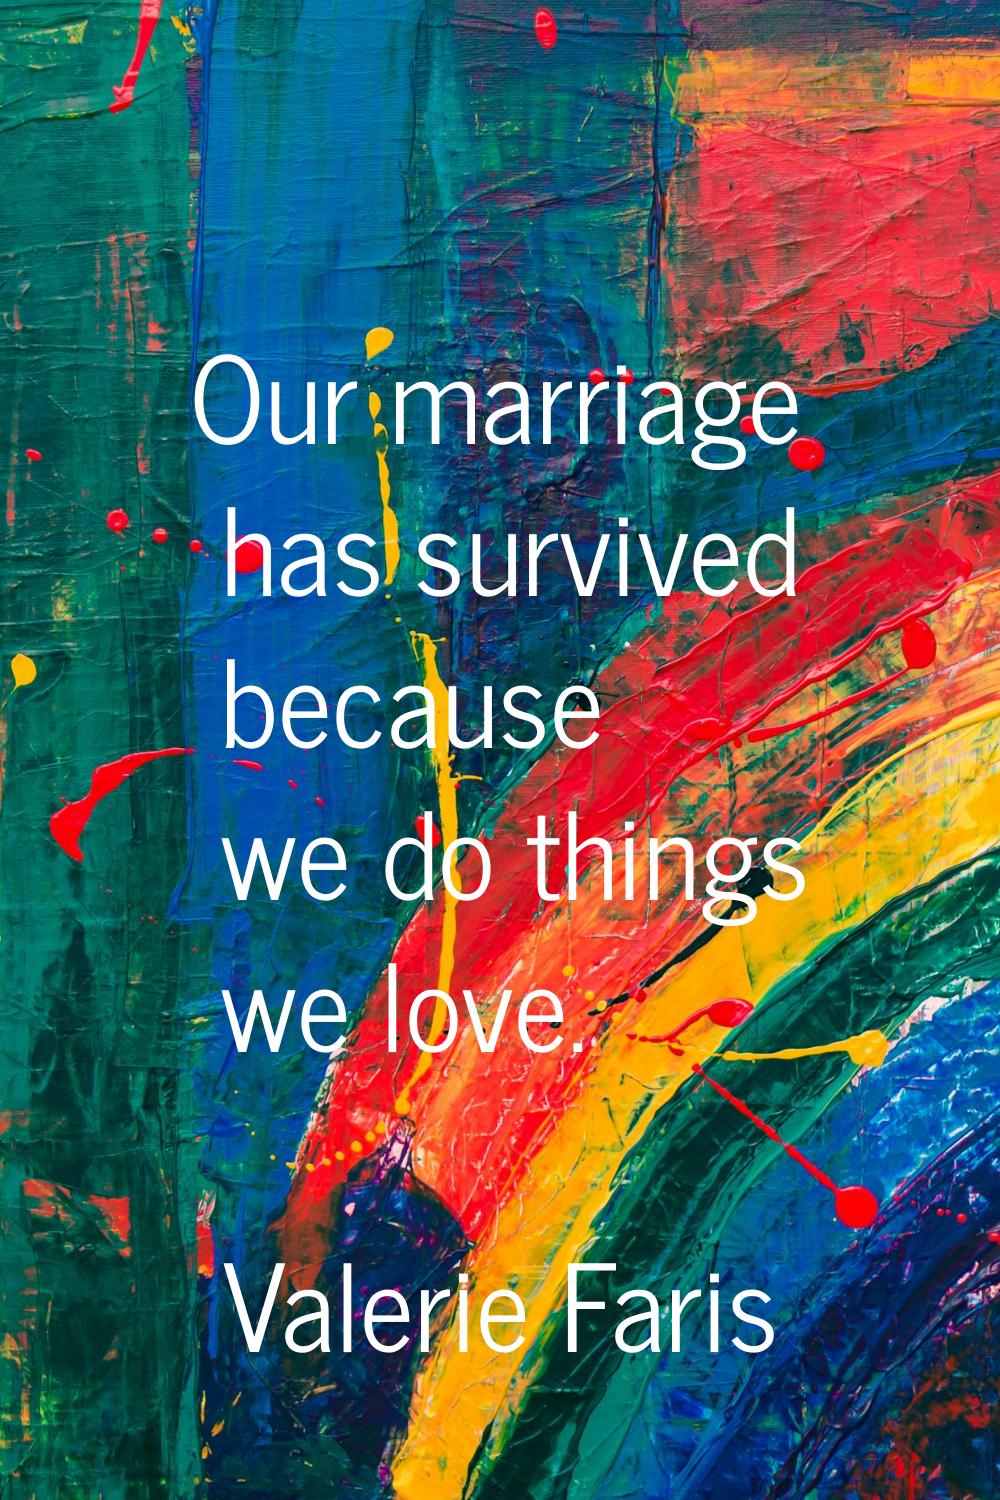 Our marriage has survived because we do things we love.